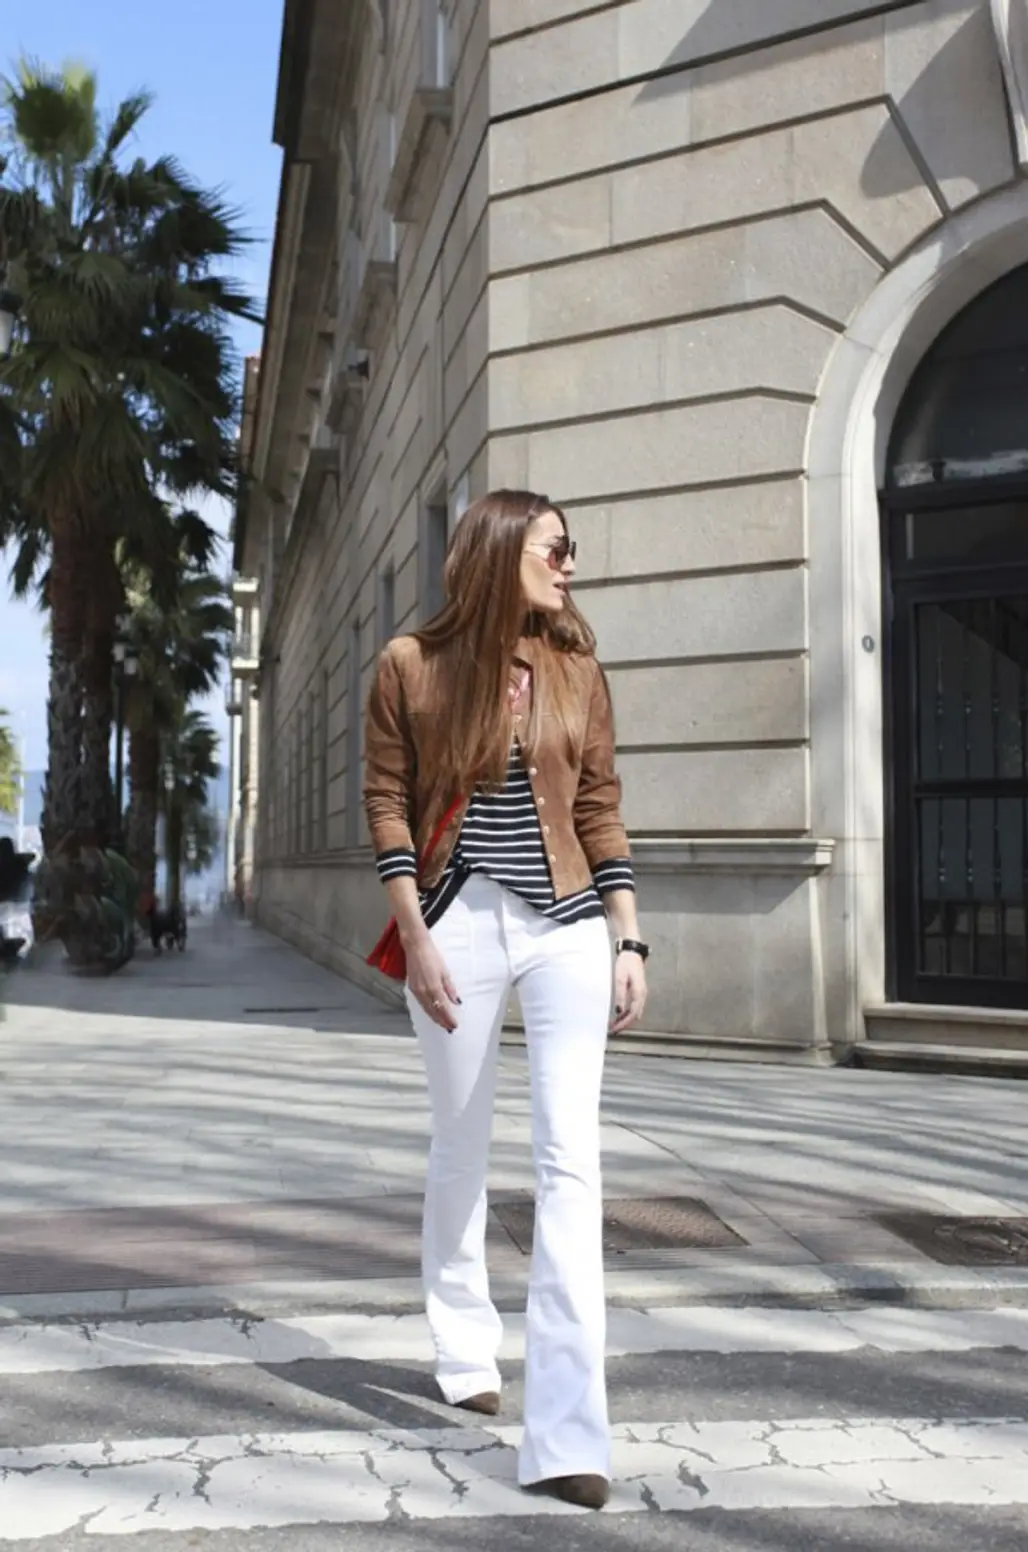 Lighten up Your Look with White Hot Flared Jeans